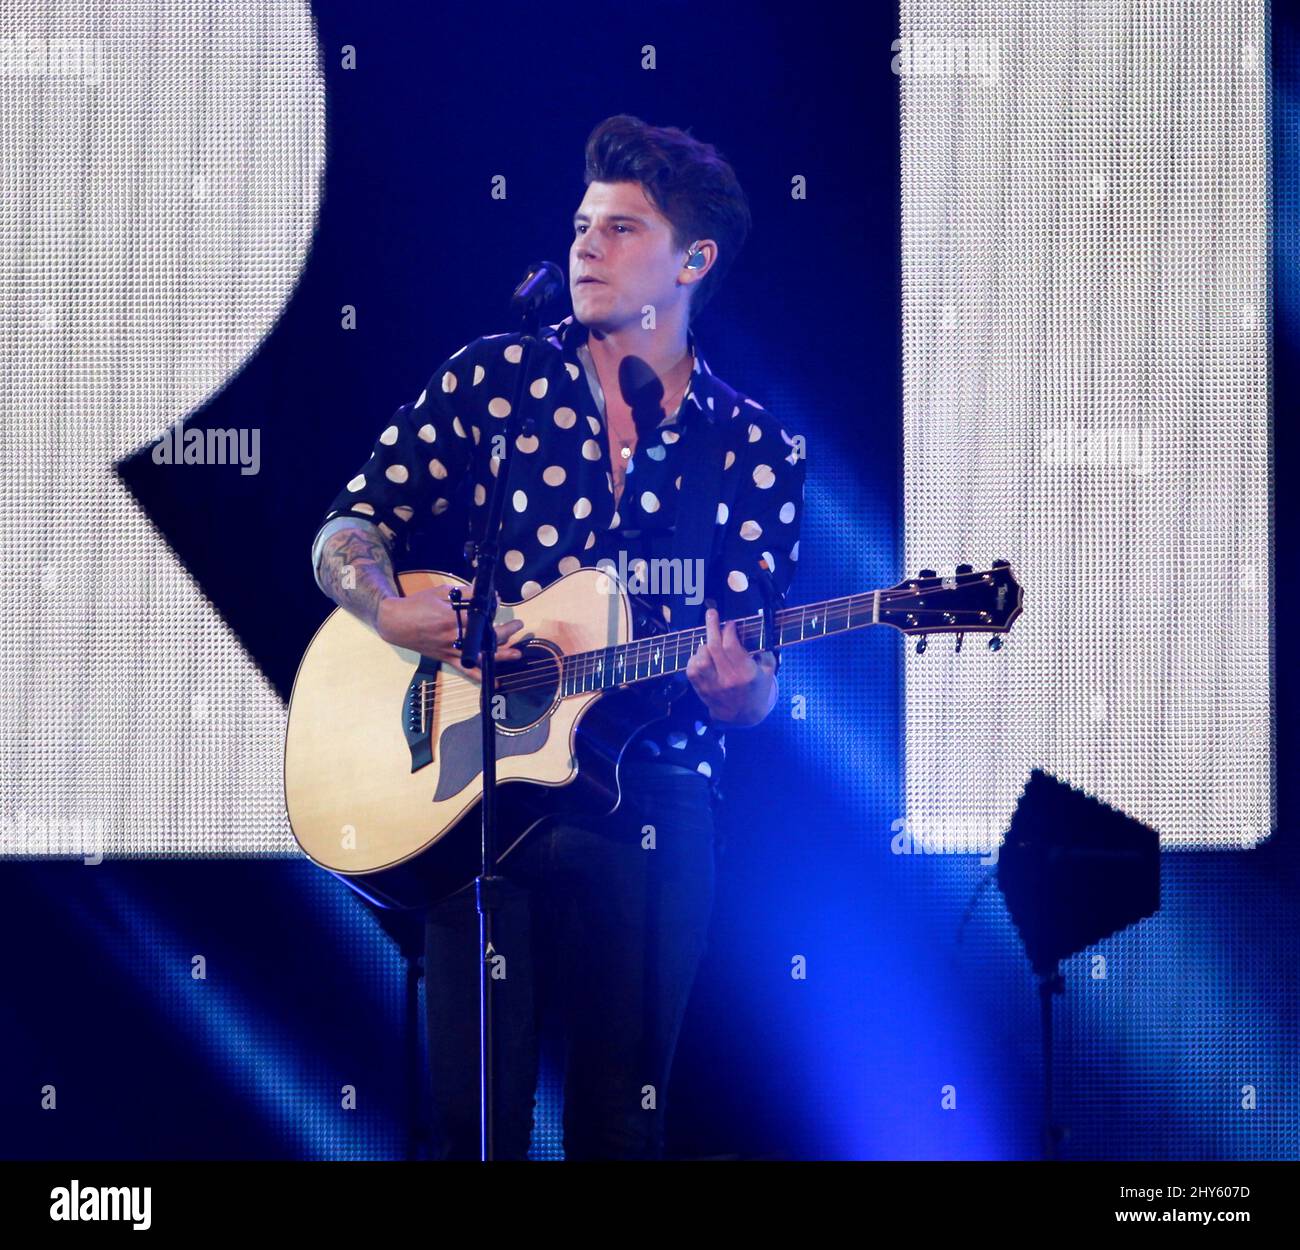 Charley Bagnall, Rixton performs during KIIS FM's Jingle Ball concert held at Staples Center, Los Angeles. Stock Photo